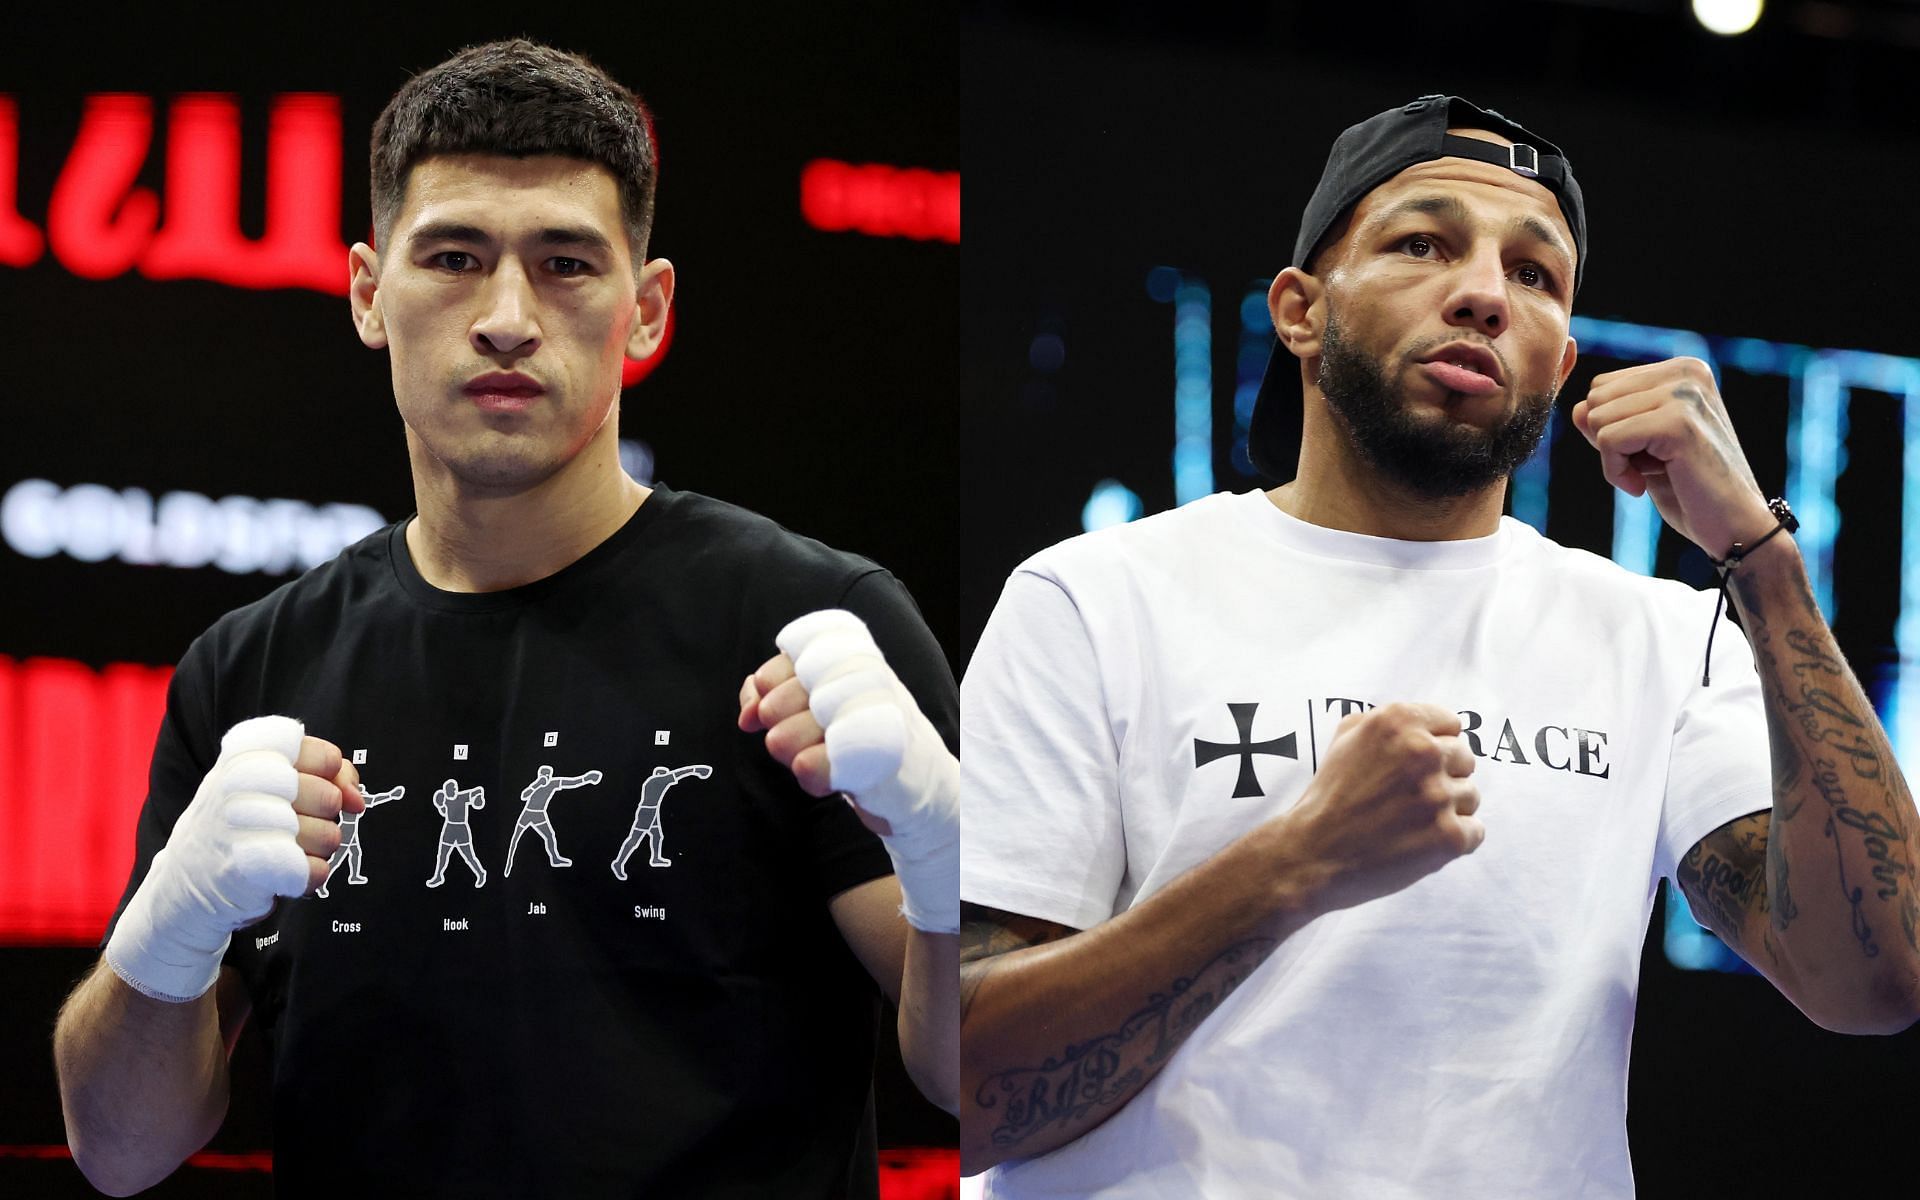 Dmitry Bivol (left) and Lyndon Arthur (right) [Images courtesy: Getty Images]